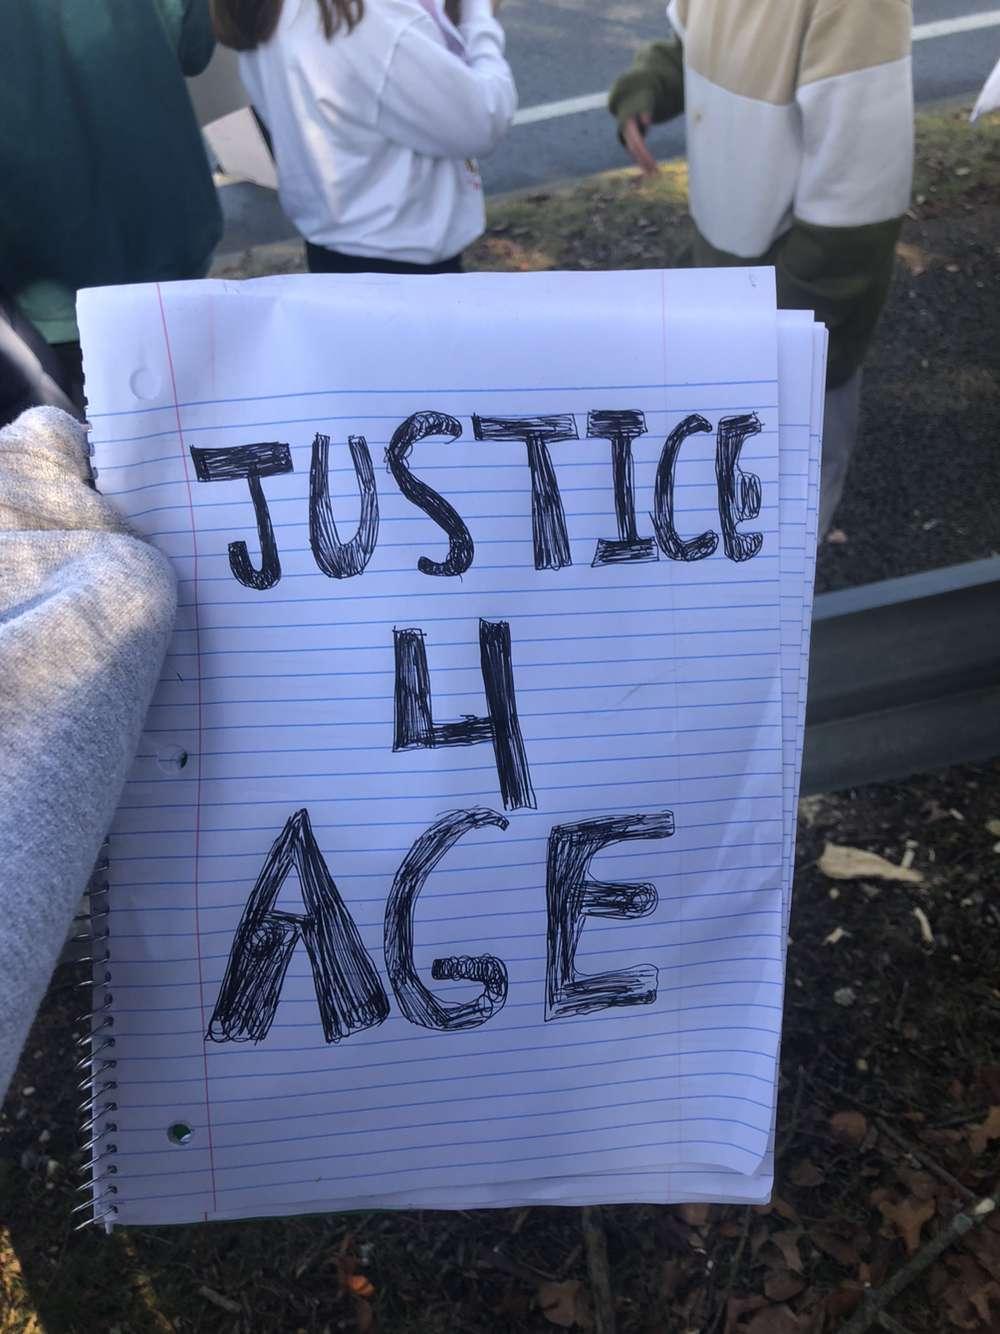 Meredith holds a sign demanding justice for her friend Adriana "Age" Kuch. The photo was taken the week of Feb. 5, 2023, in Bayville, N.J. (Courtesy of Meredith)